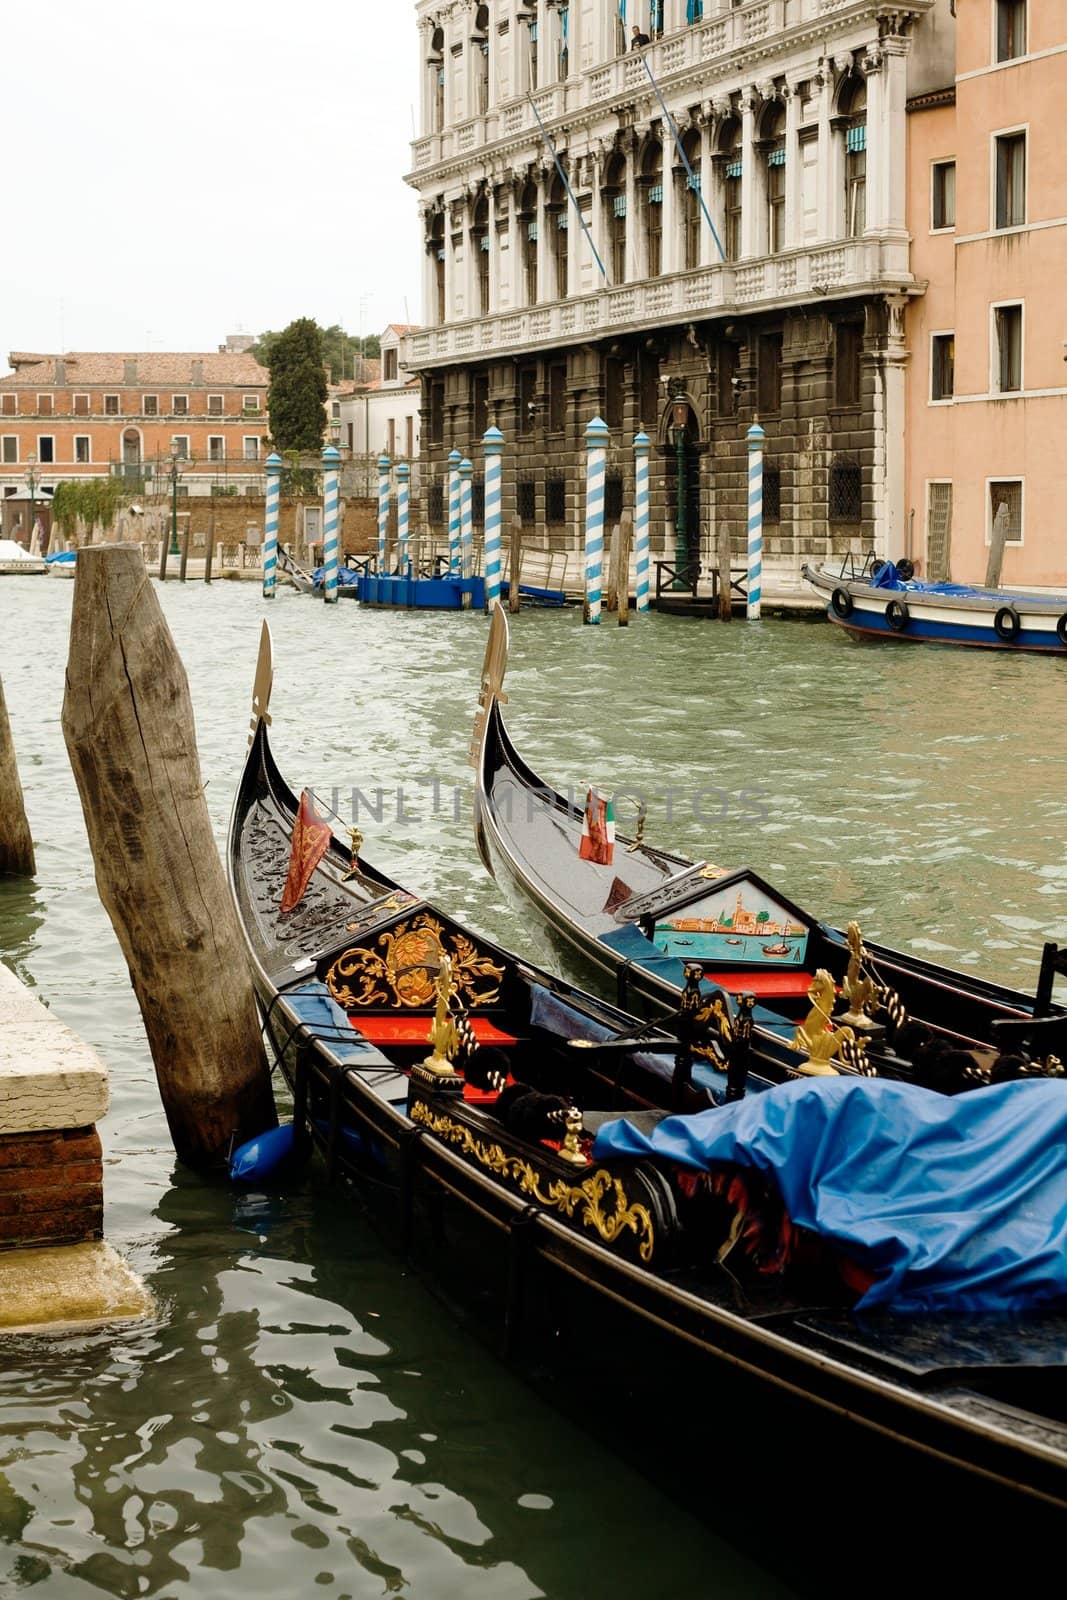 An image of two gondolas in Venice